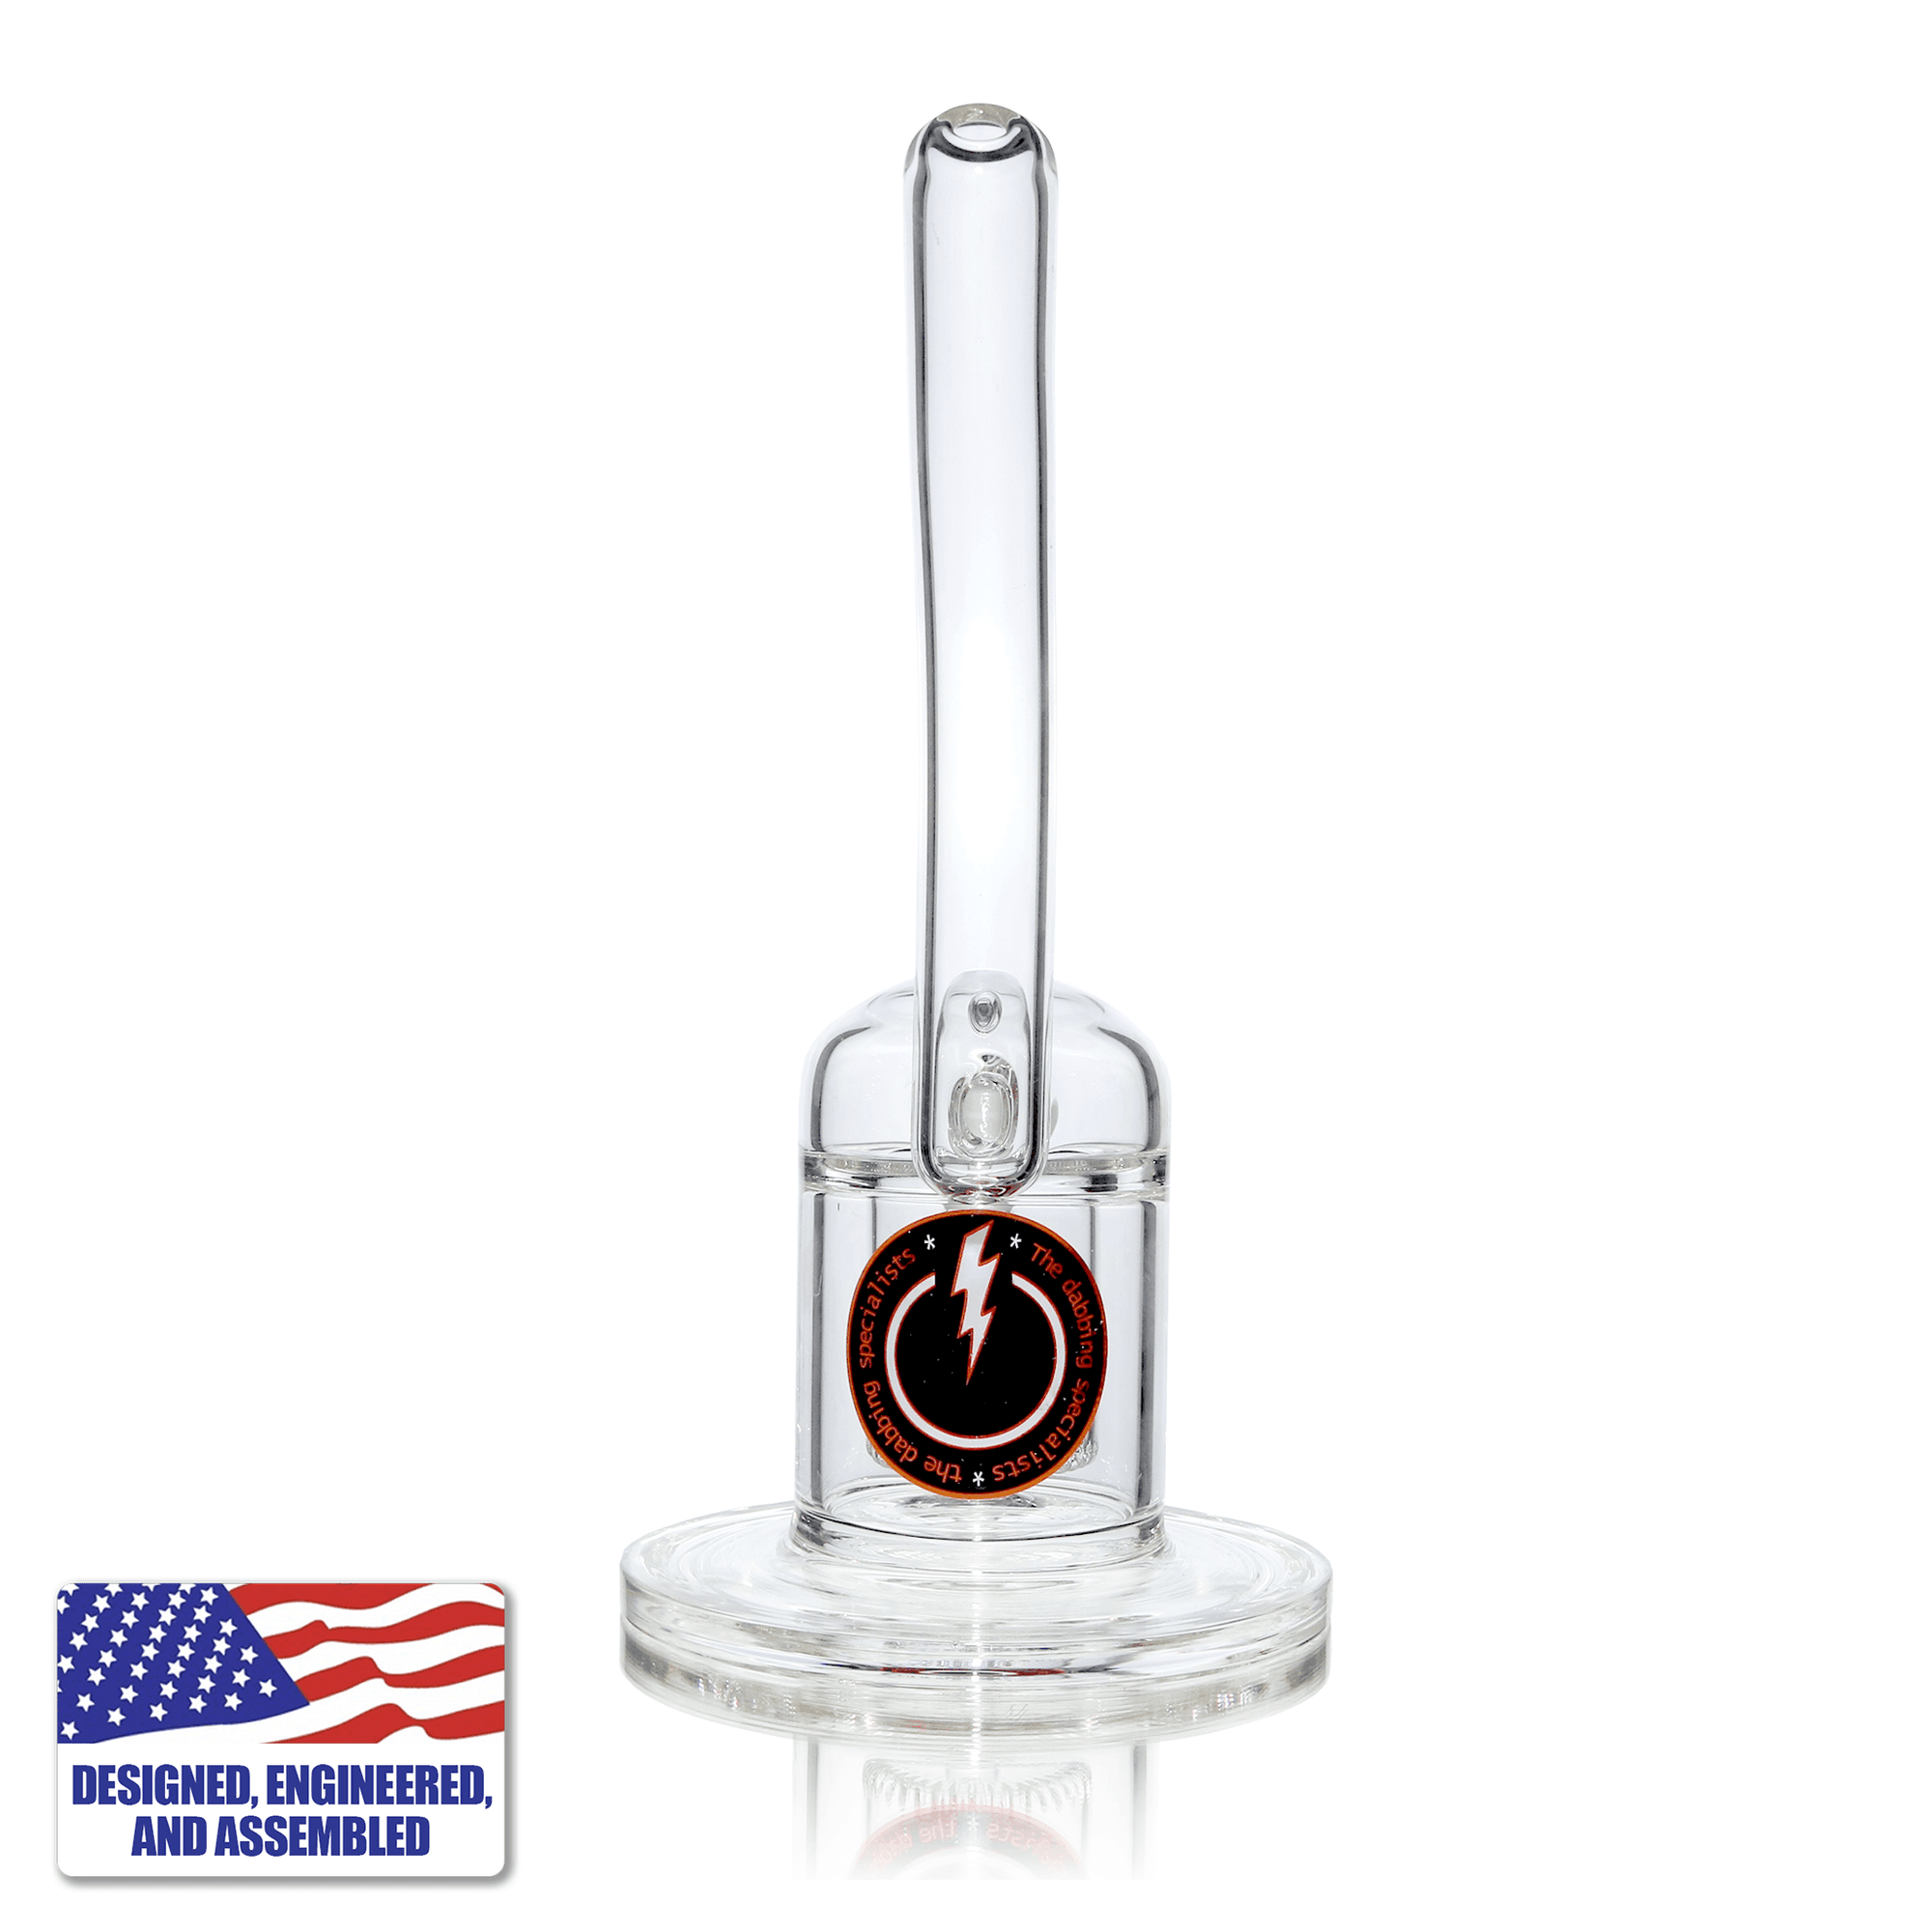 Glass and Nail Rig | Showerhead Bubbler with Hybrid Quartz Nail | Complete View | Dabbing Warehouse